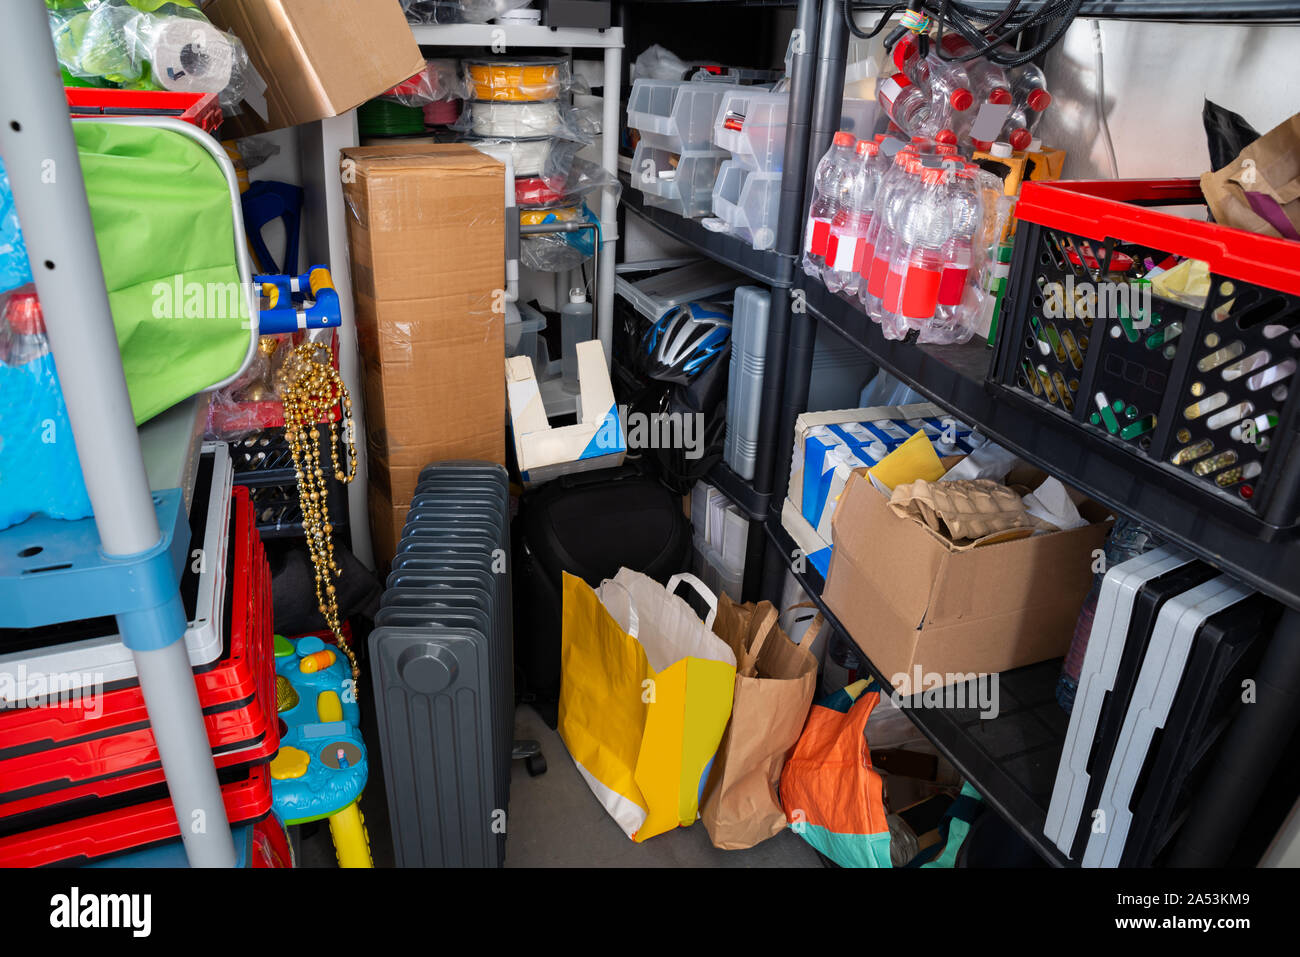 Organization Of Home Space Storage And Coziness A Lot Of Plastic Household  Goods New Clean Container Boxes With A Lid For Easy Storage Of Things  High-Res Stock Photo - Getty Images